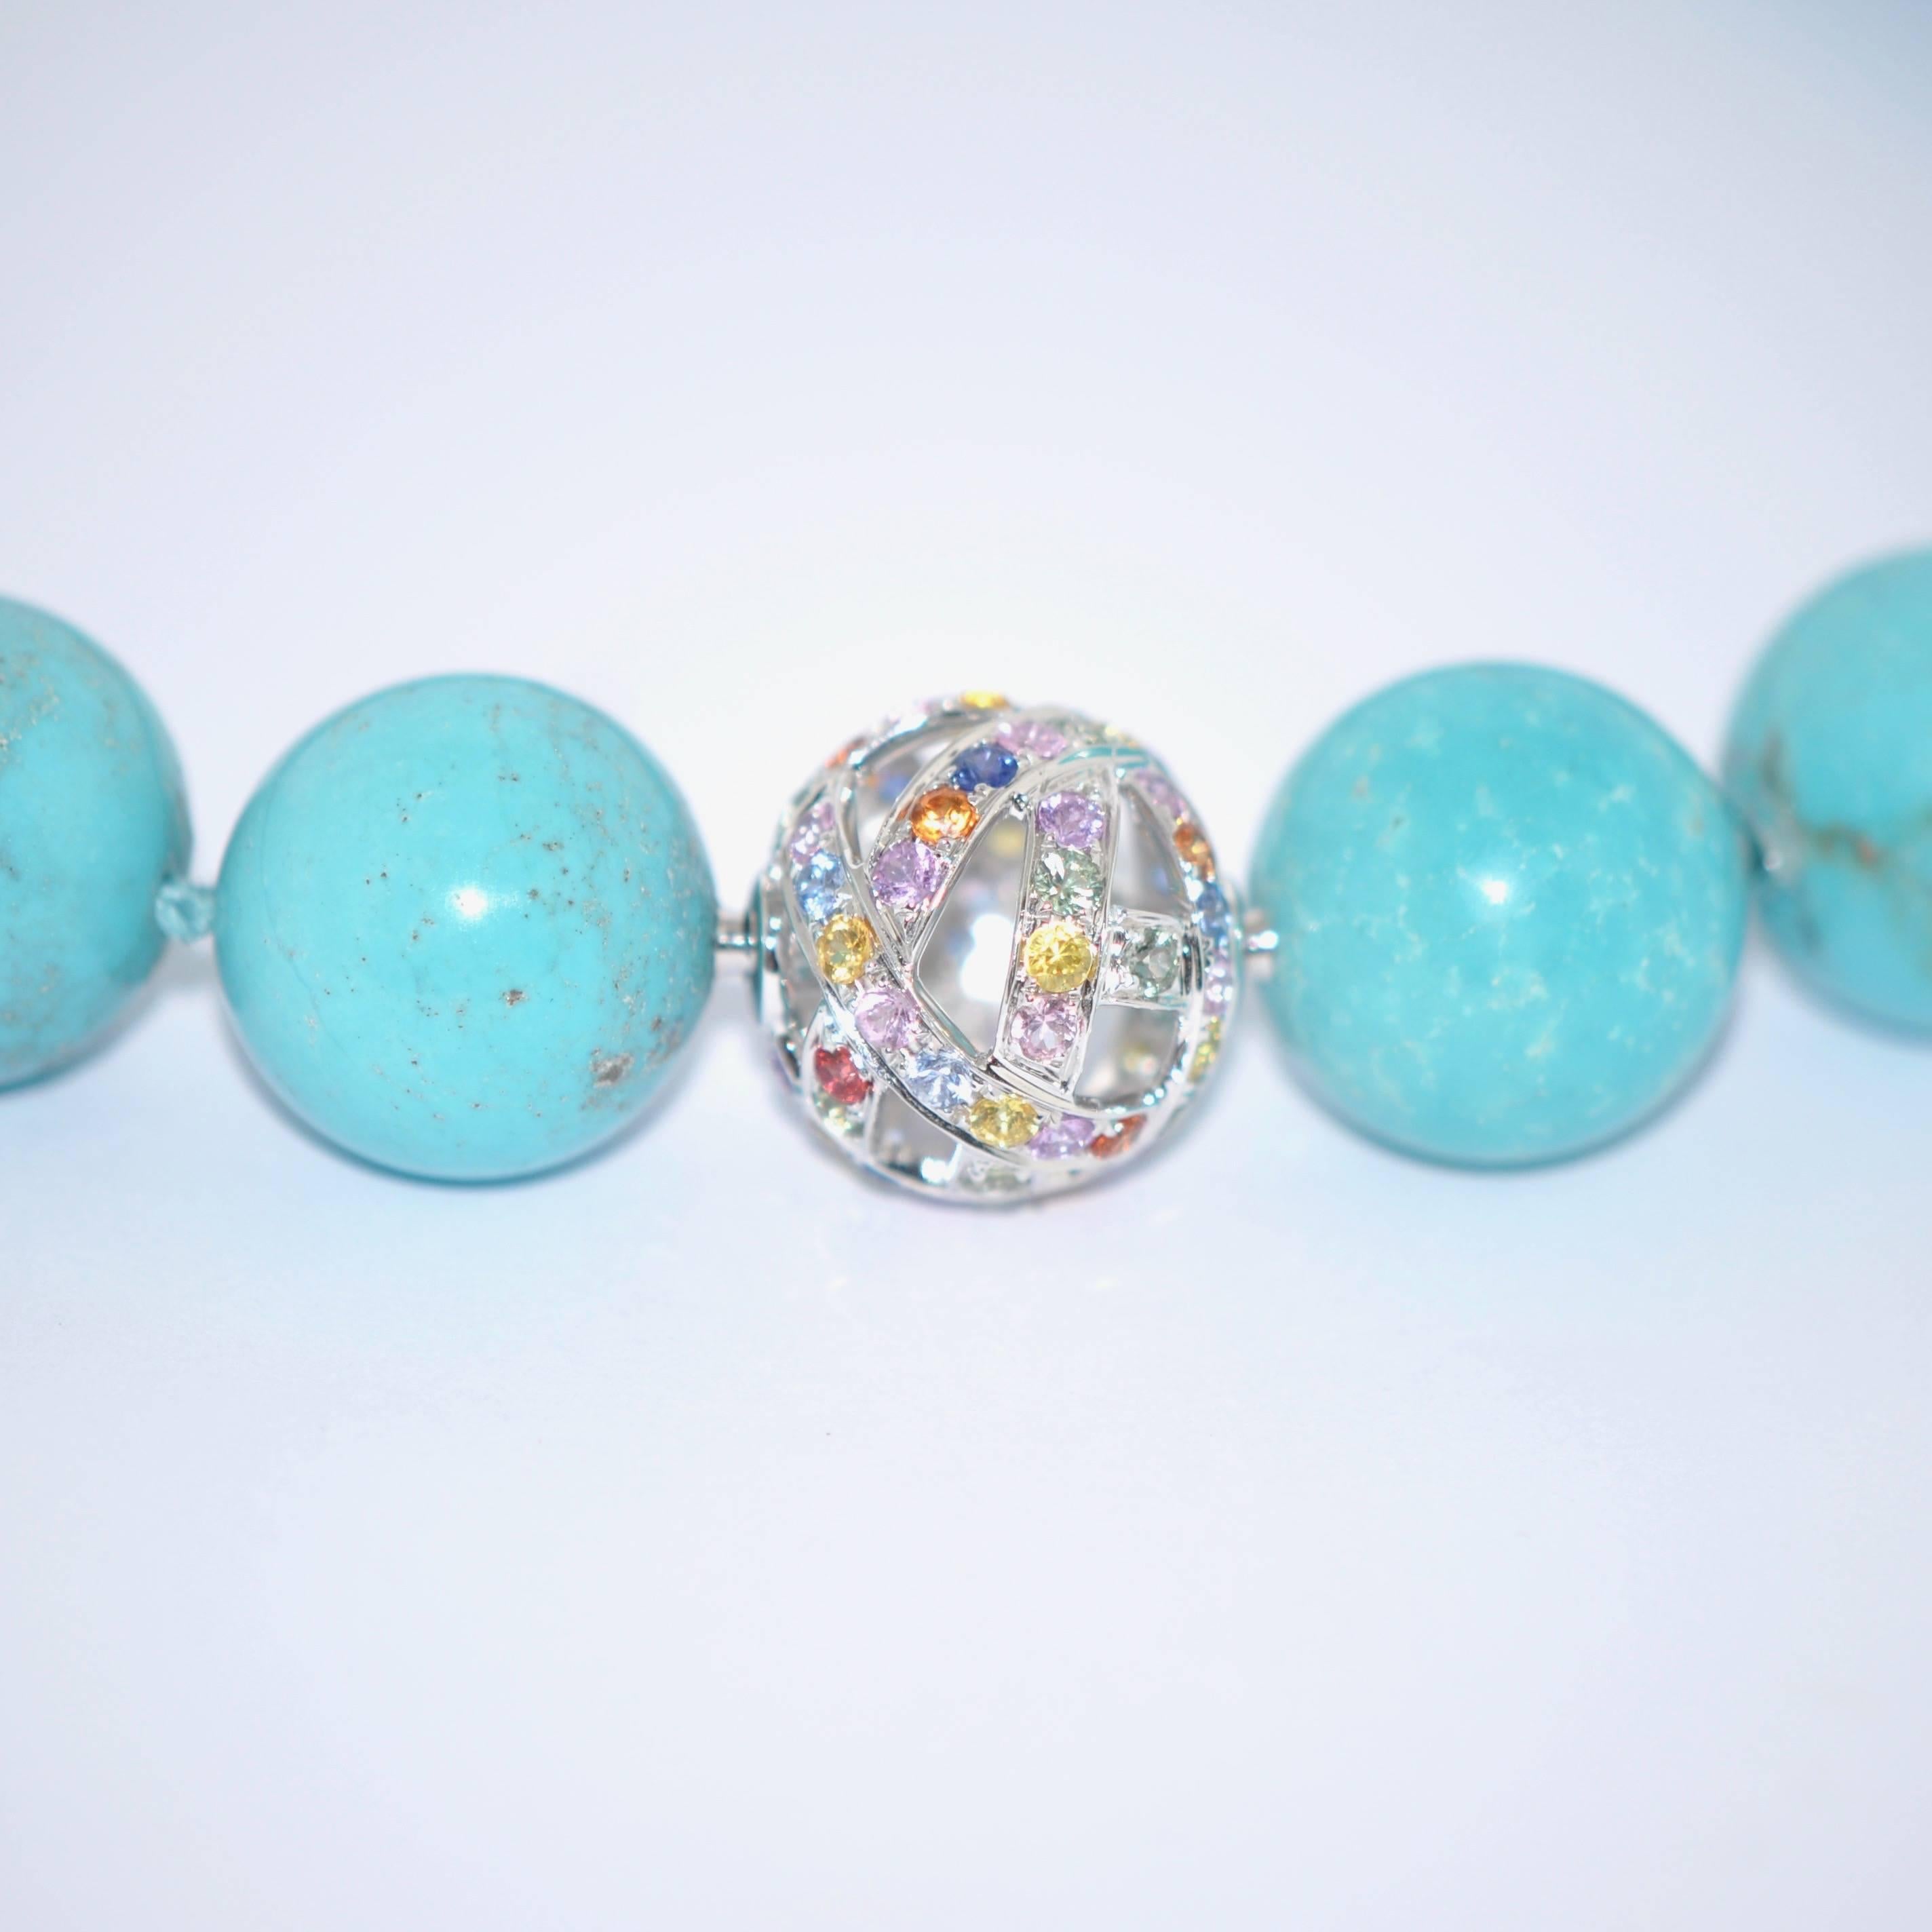 Discover this Natural Turquoises and White Gold 18K Colorful Sapphires Clasp Beaded Necklace.
22 Natural Turquoises 18mm/0.71 in
66 Round Fancy Sapphires Blue, Pink, Yellow, Orange, Green
White Gold 18K Ball Clasp with 66 Fancy Sapphires 18mm/0.71